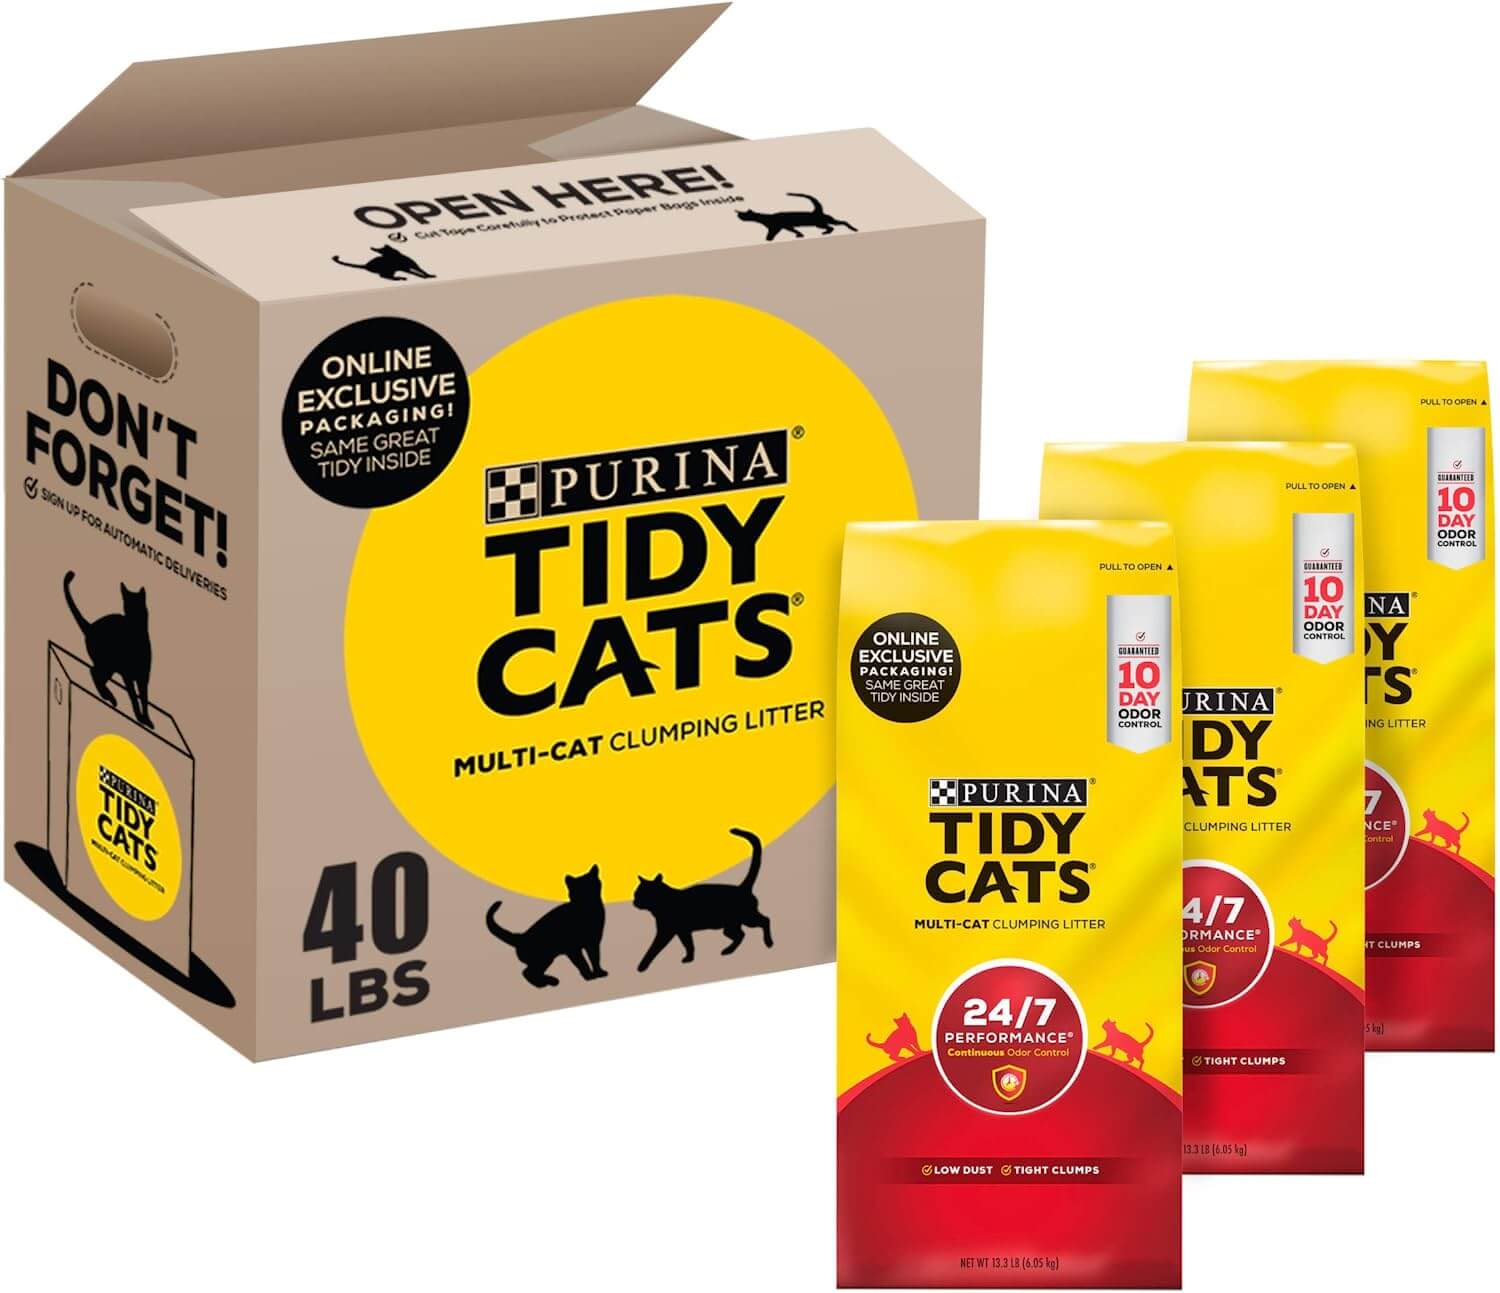 Purina Tidy Cats Clumping Cat Litter 24-7 Performance